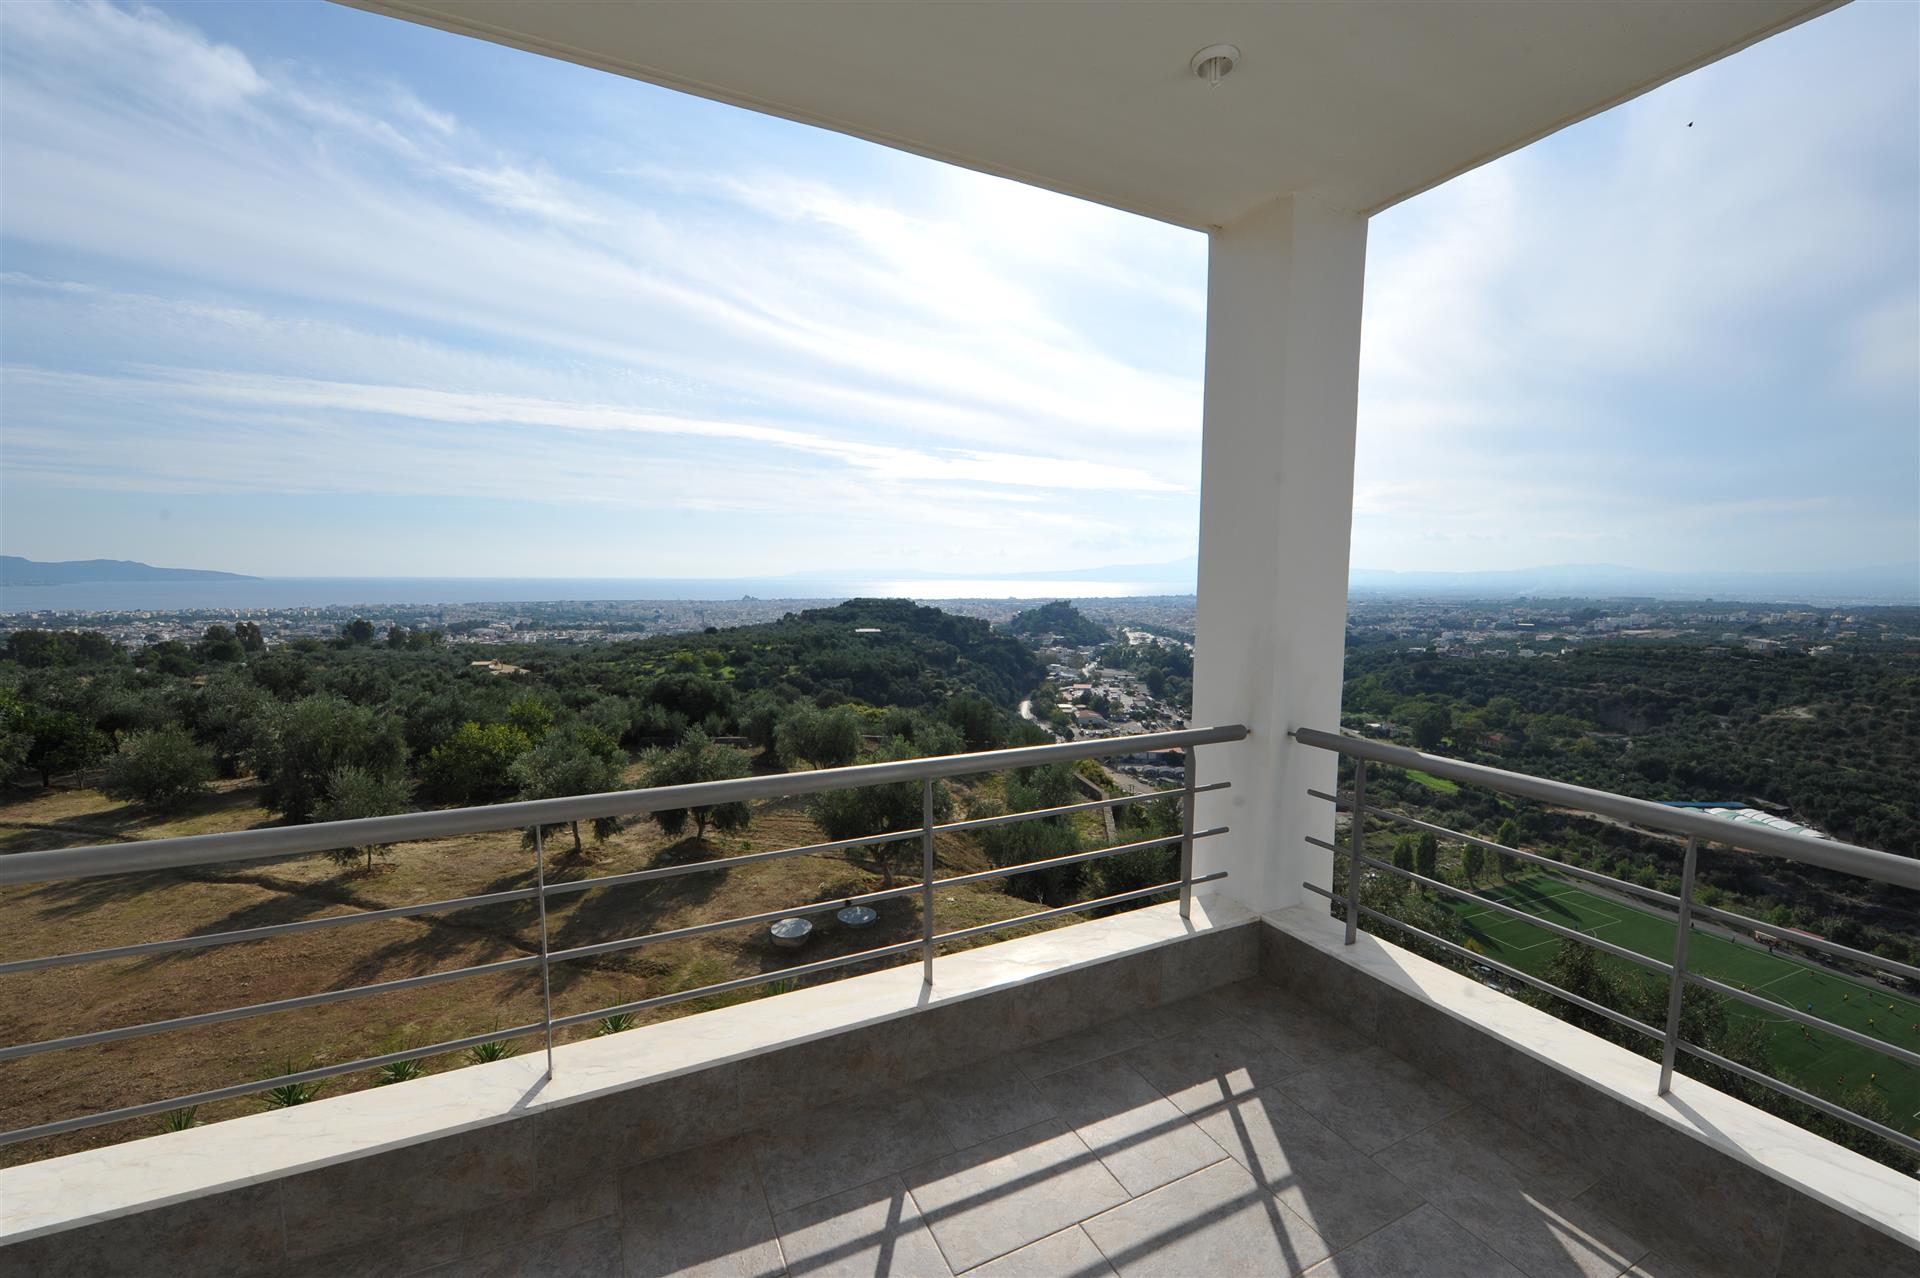 Excellent villa for sale in the Kallithea area of Kalamata